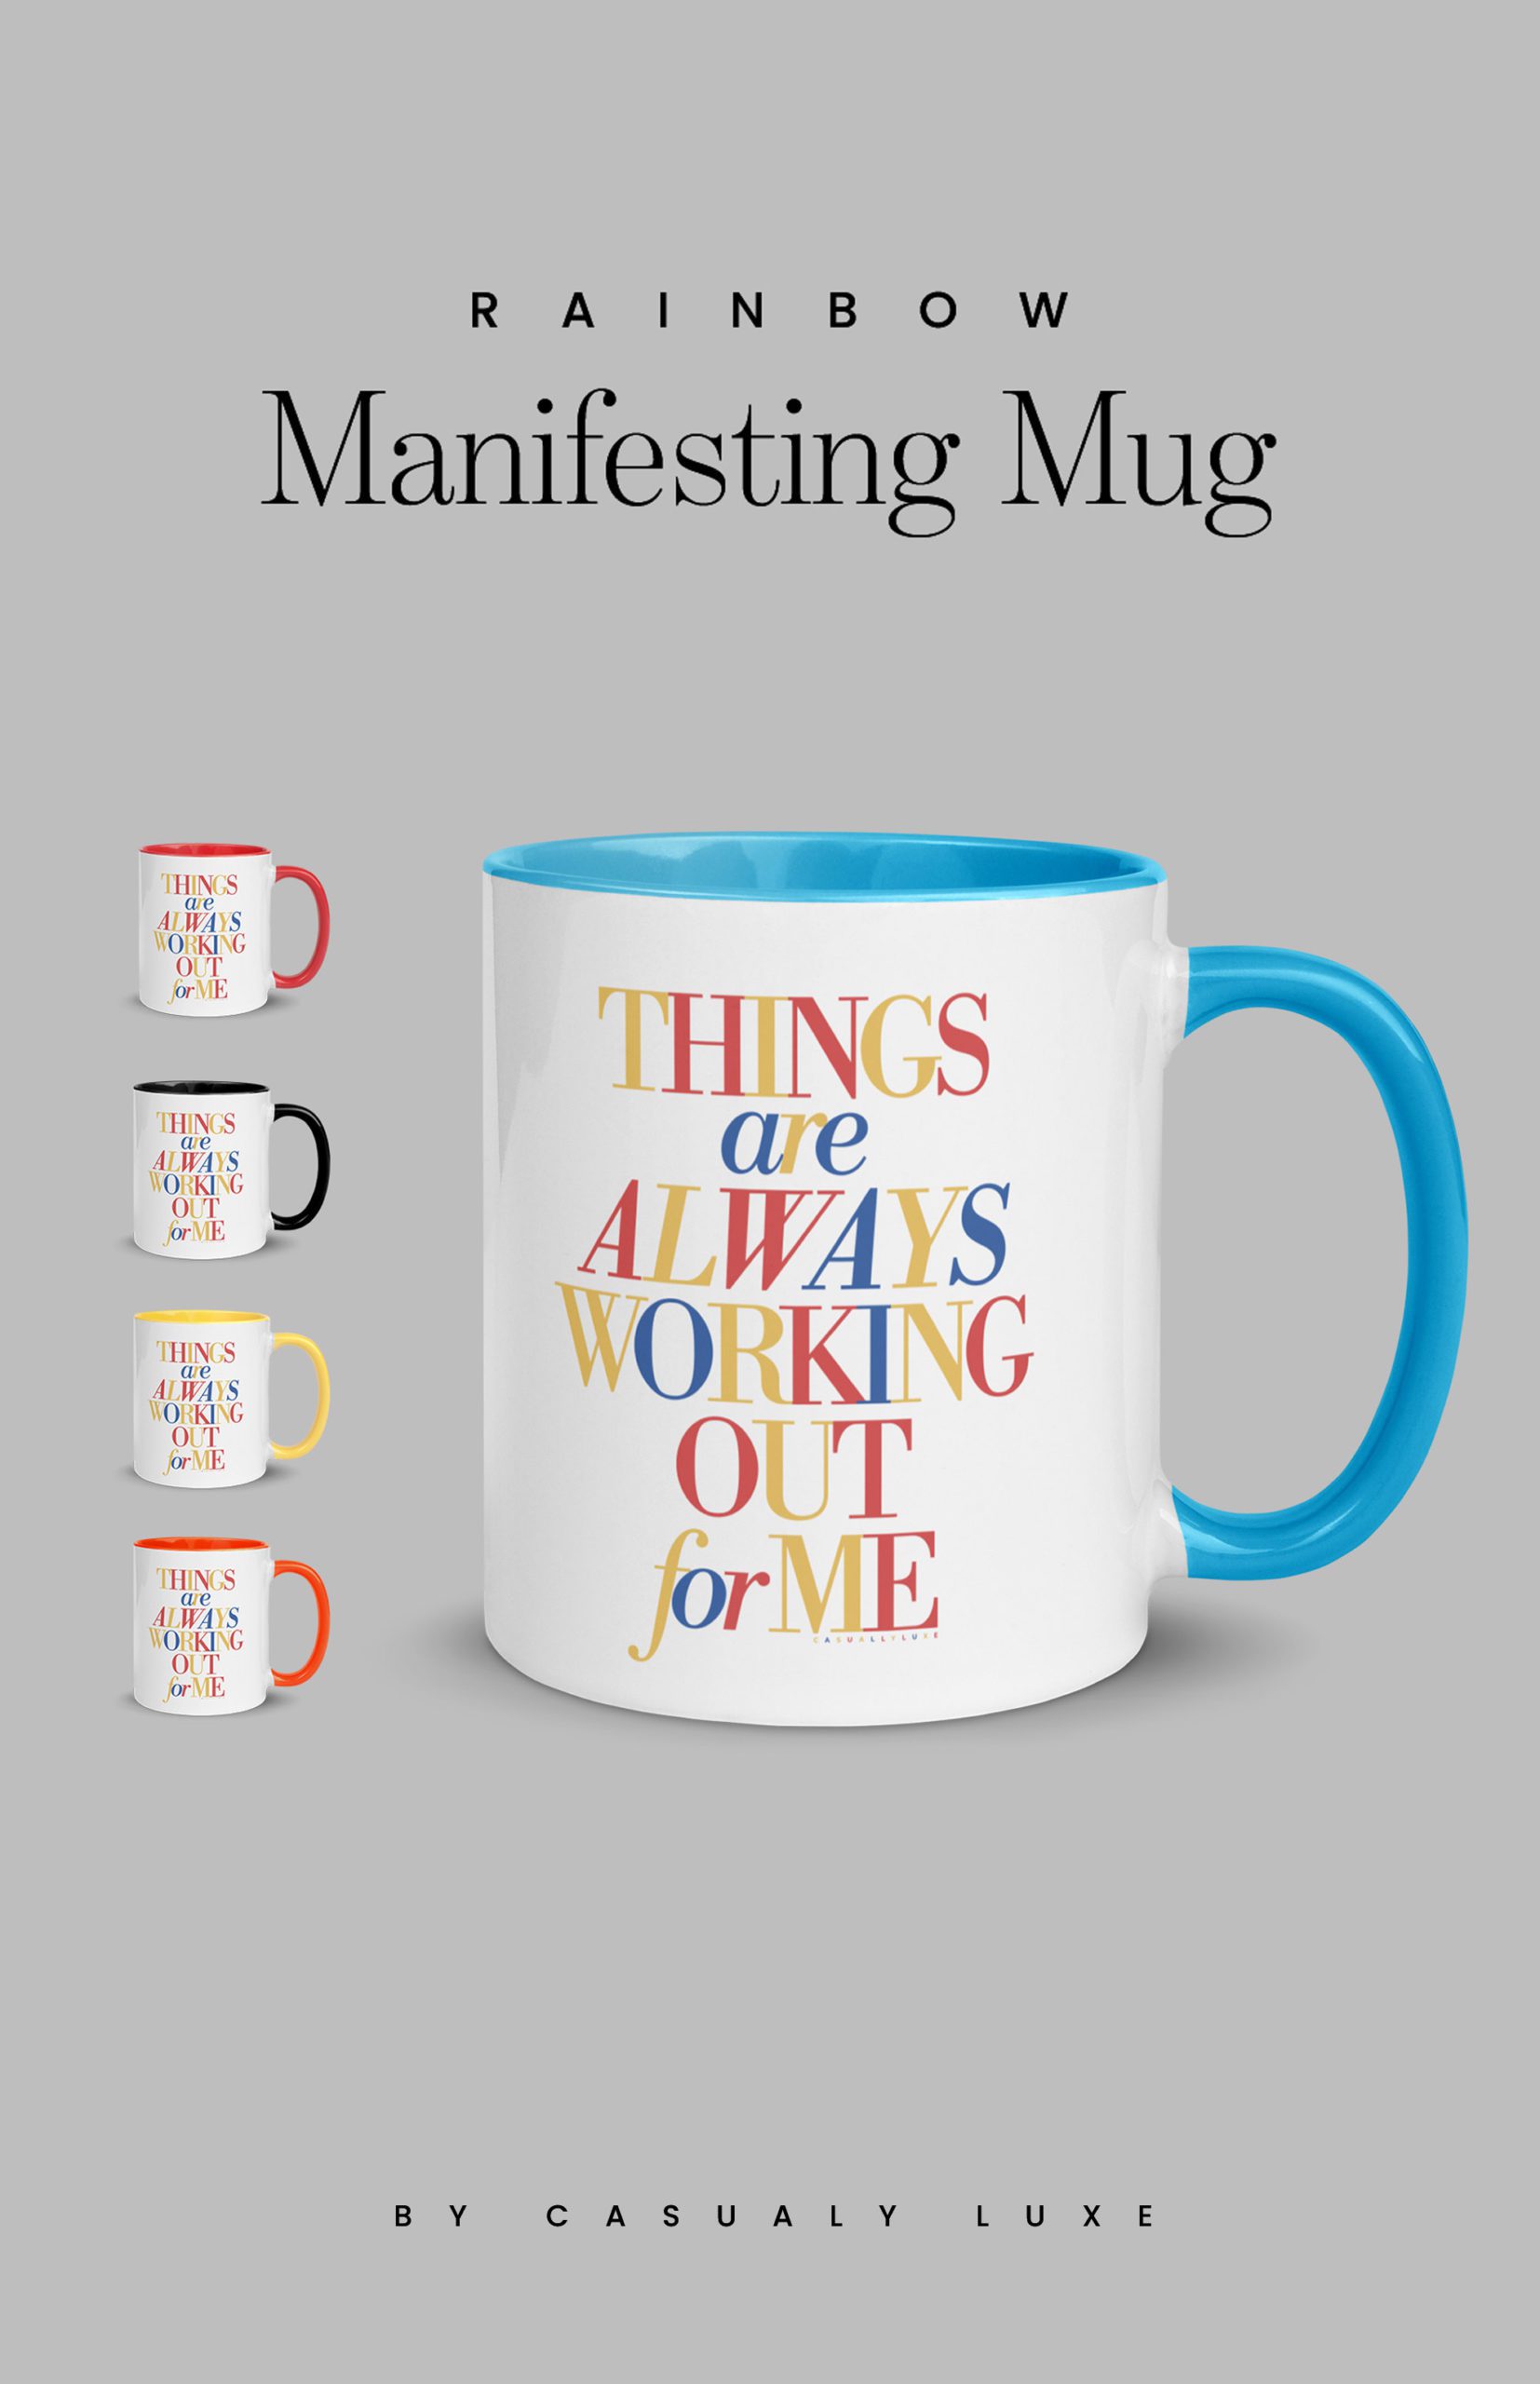 Law of Vibration manifesting mug by CasuallyLuxe